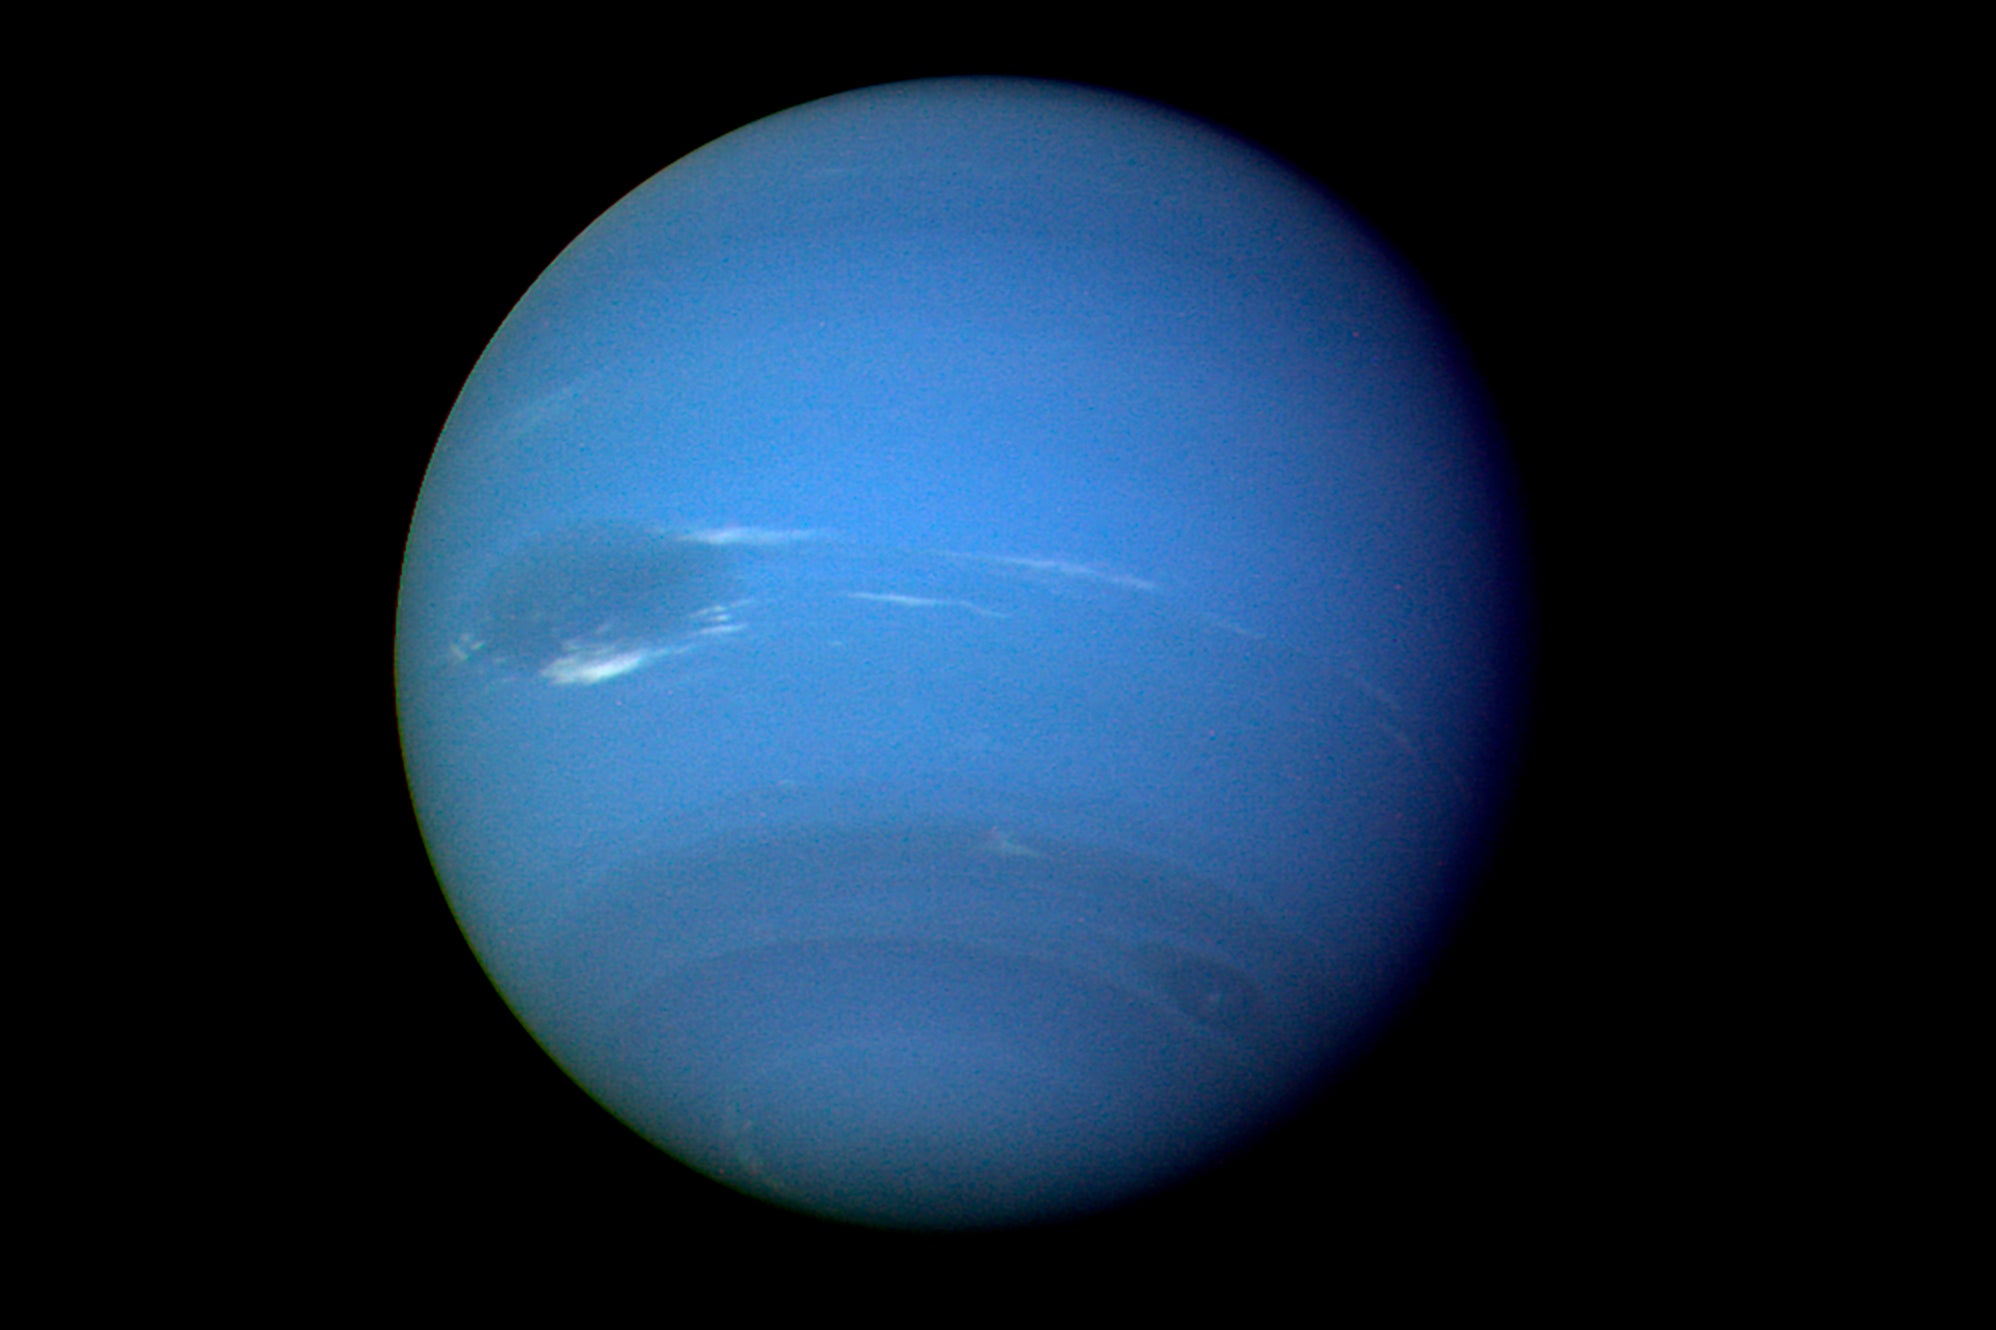 This August 1989 image provided by NASA shows the planet Neptune photographed by the Voyager 2 spacecraft